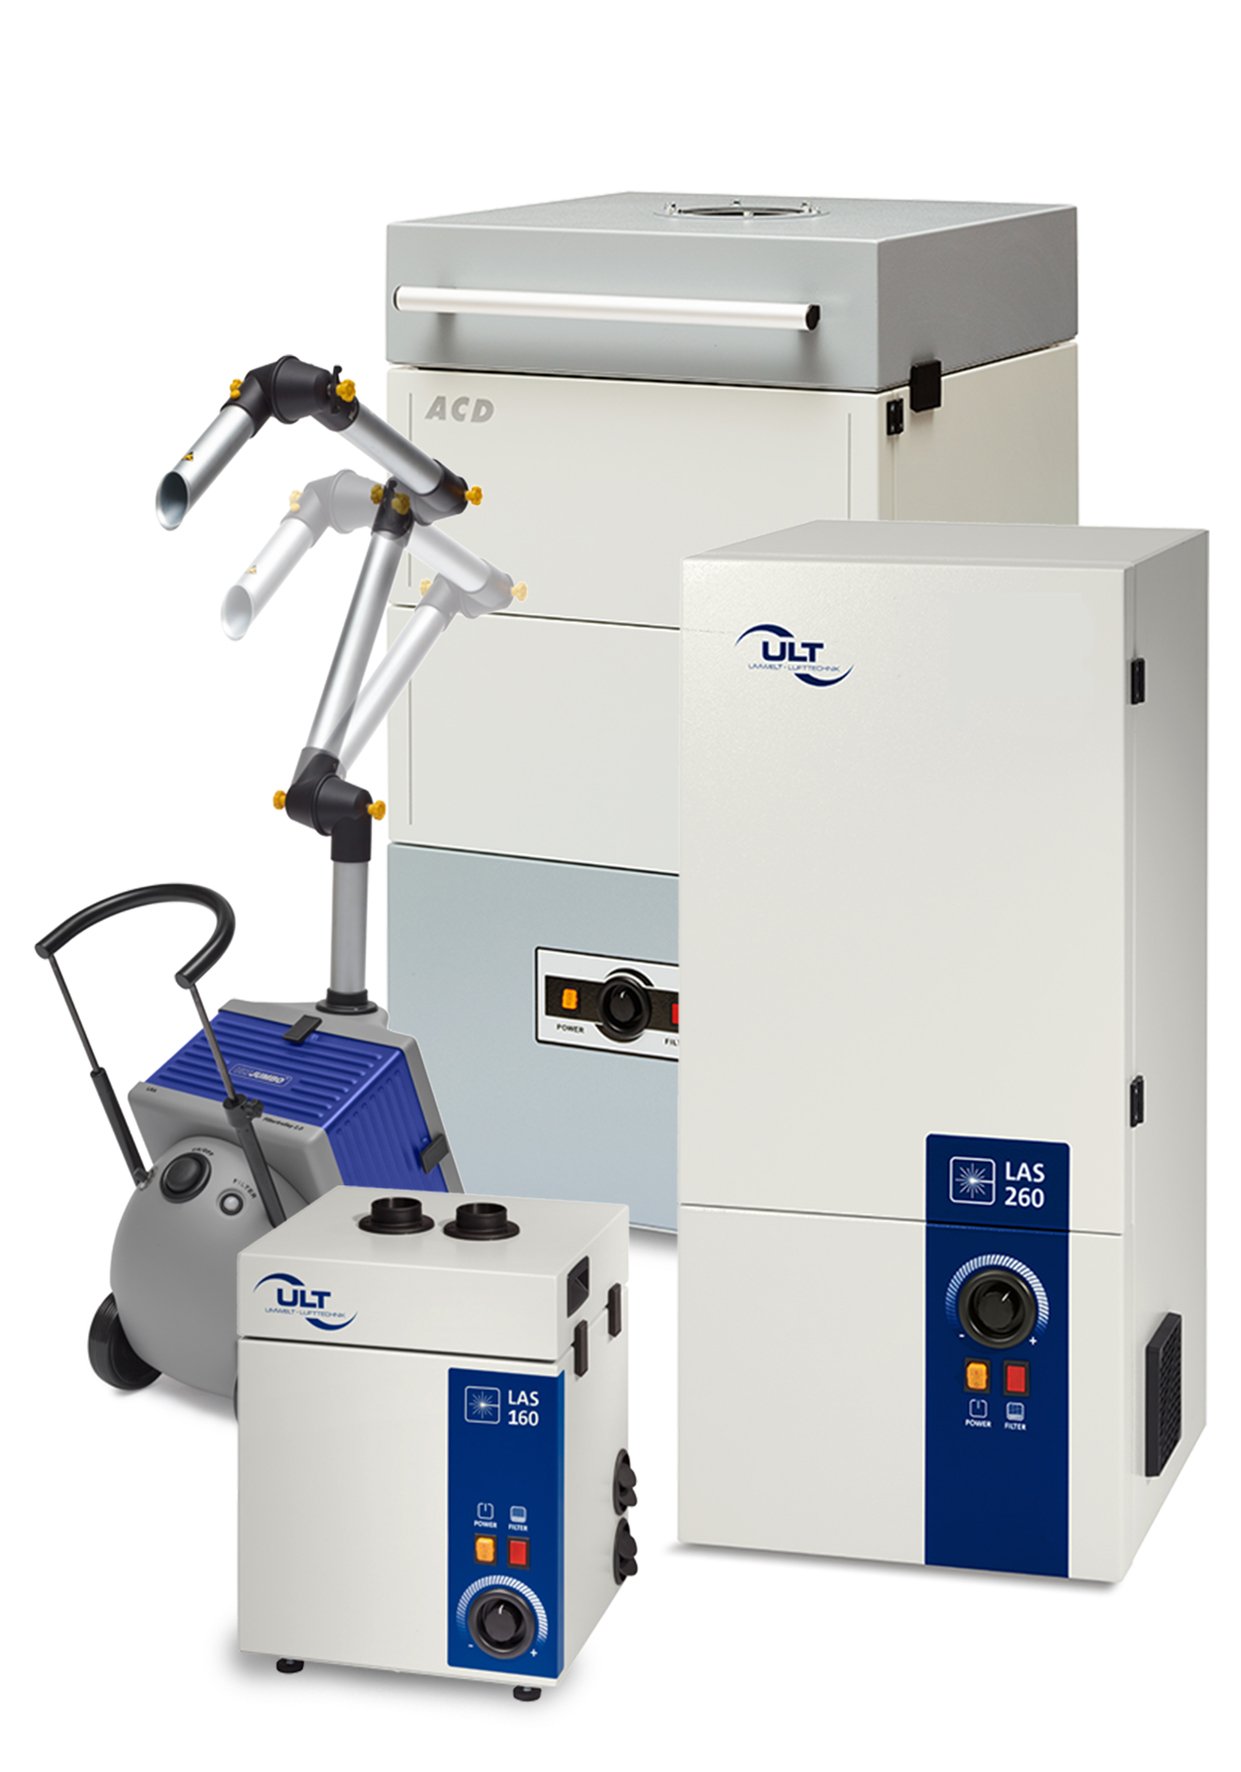 Laser fume extraction systems